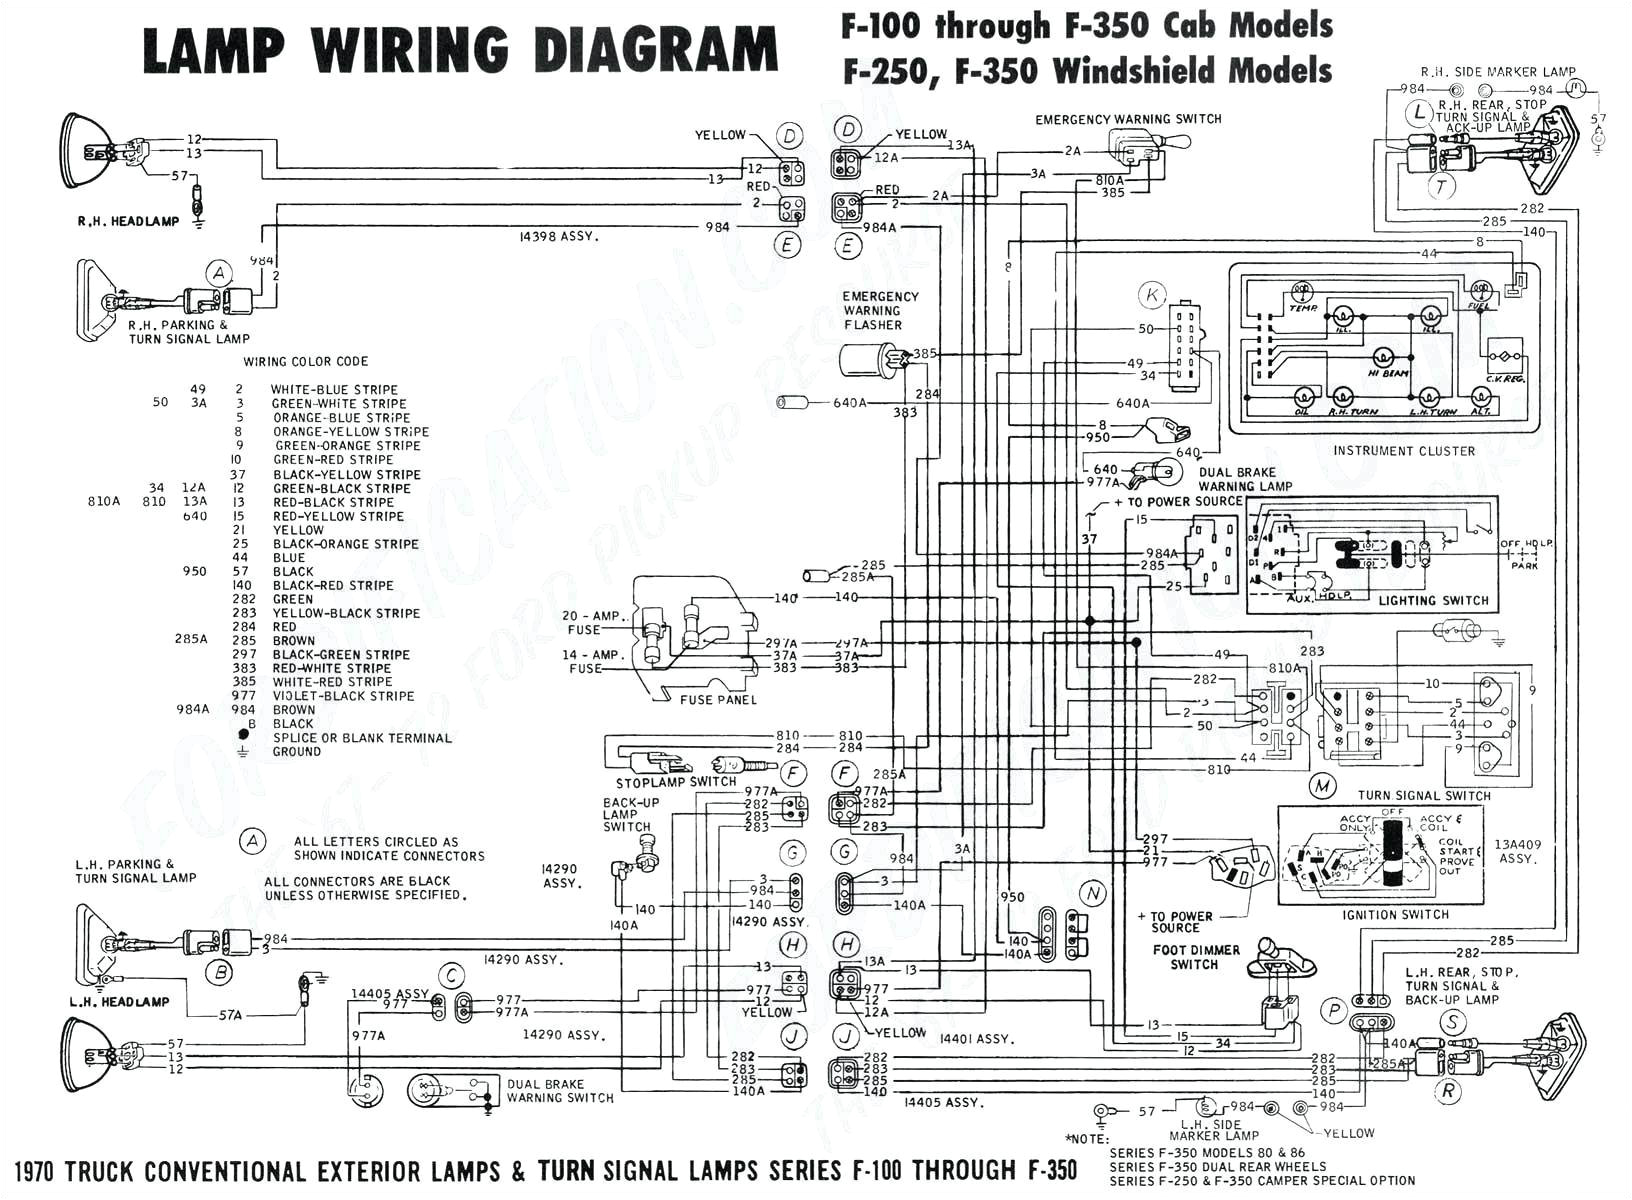 air on board switch wiring diagram awesome apollo gate opener wiring diagram new simple circuit board diagram